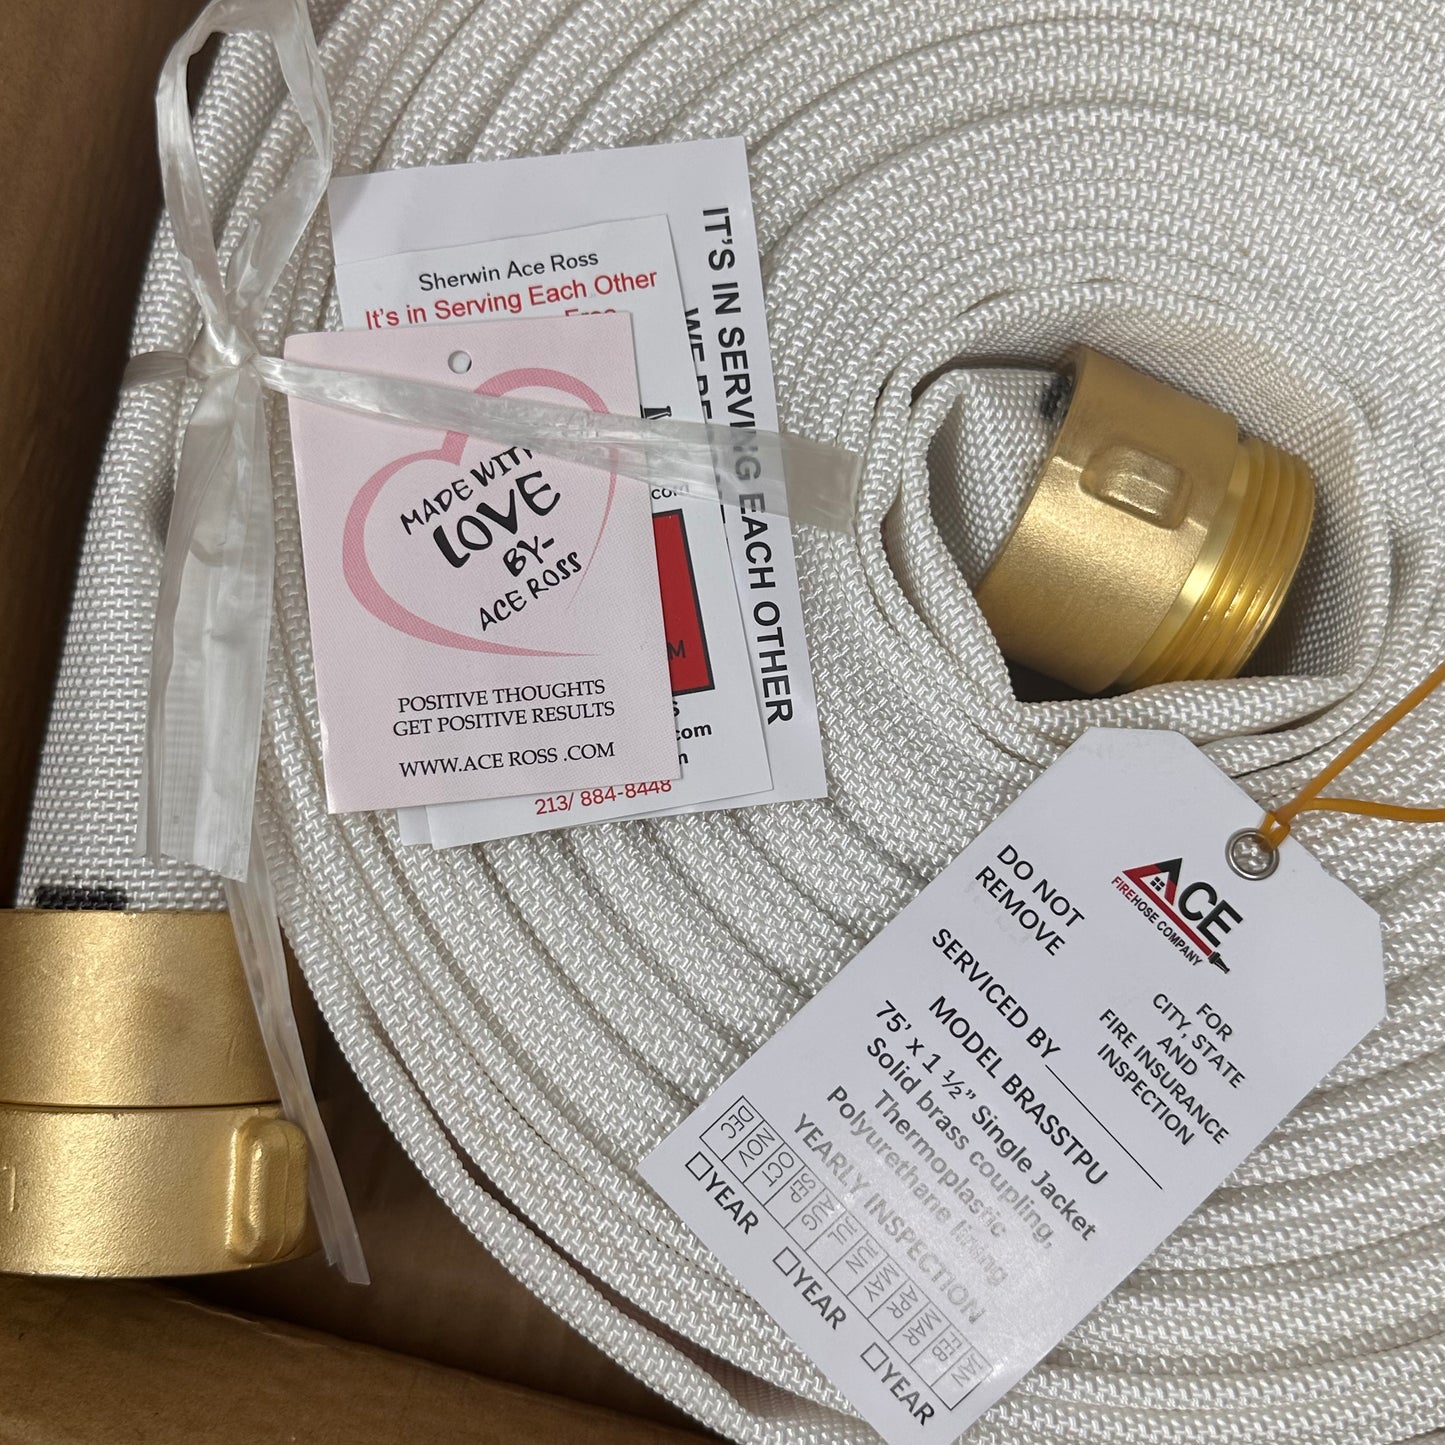 High Quality Home Defense Fire Hose
 75’ x 1.5”, Folded, NH Brass Couplings, TPU Lining, FM Approved for occupant use.